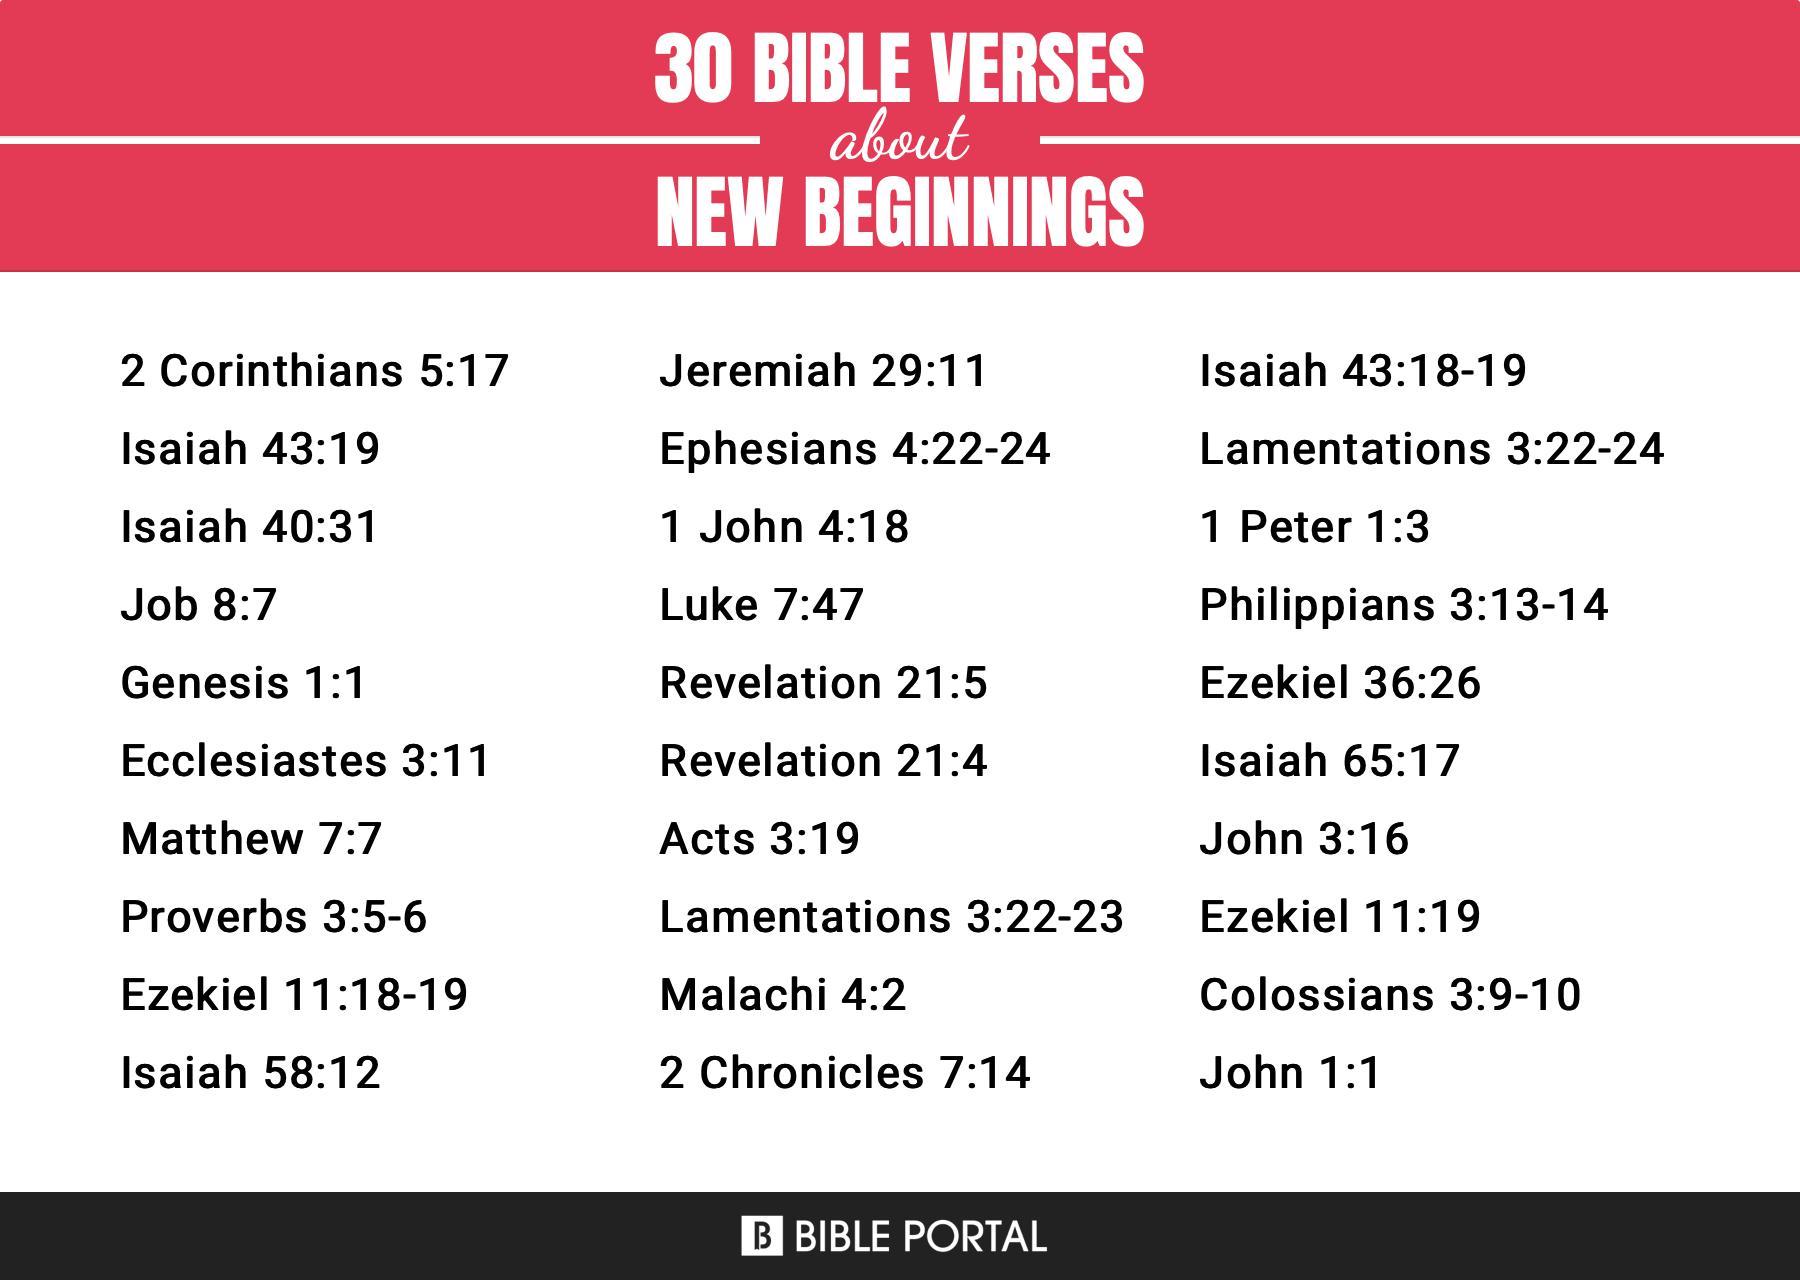 What Does the Bible Say about New Beginnings?